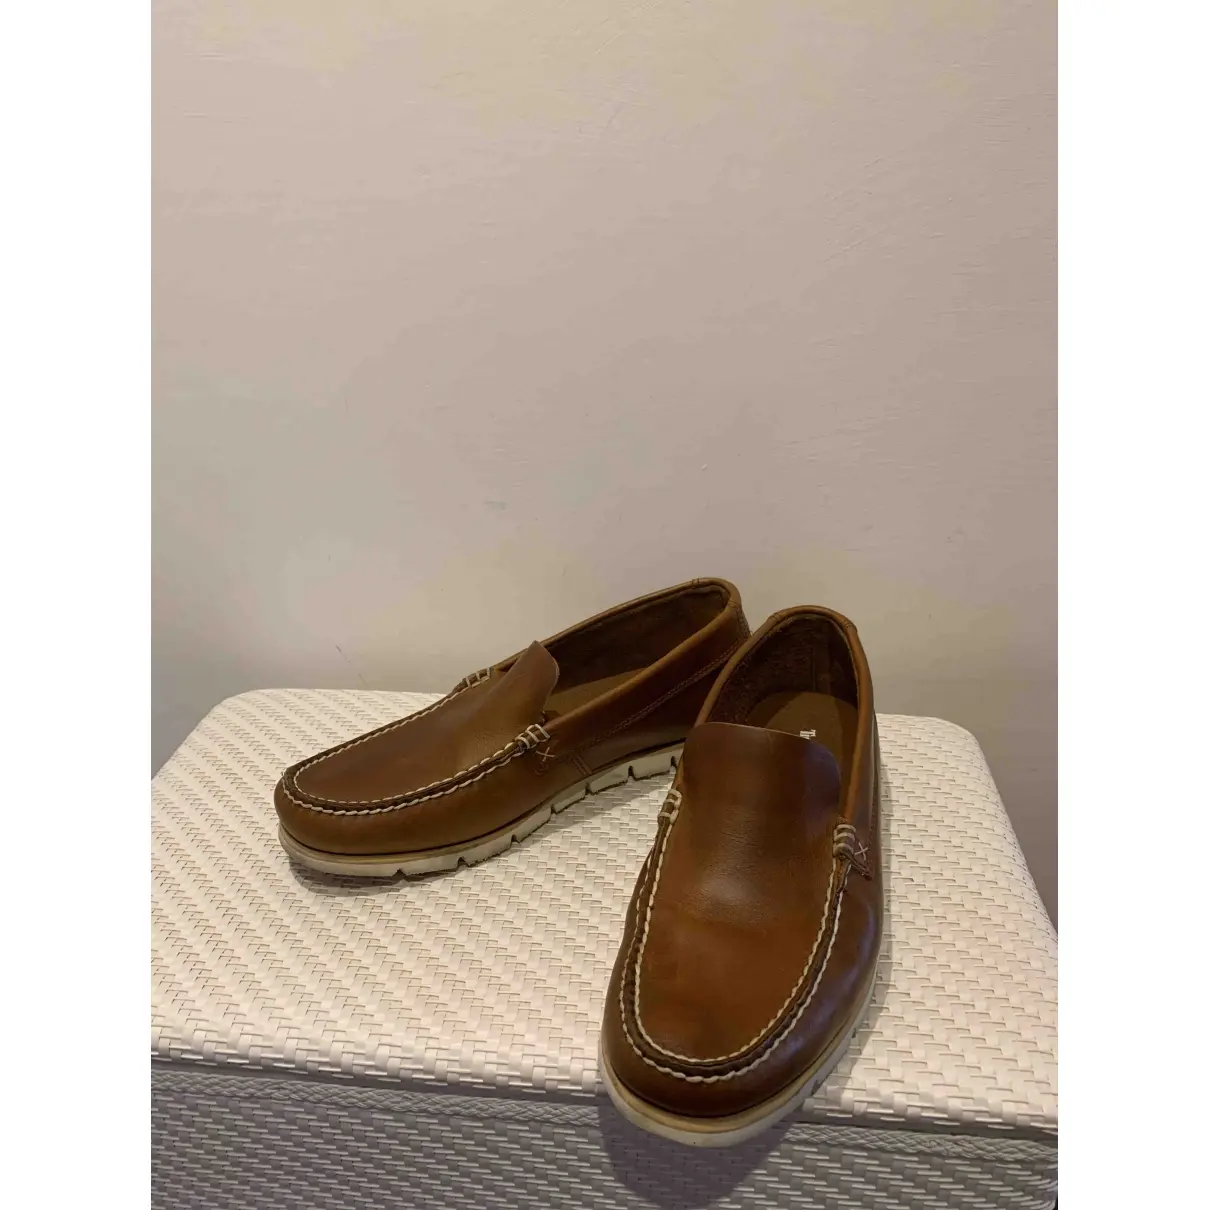 Timberland Leather flats for sale